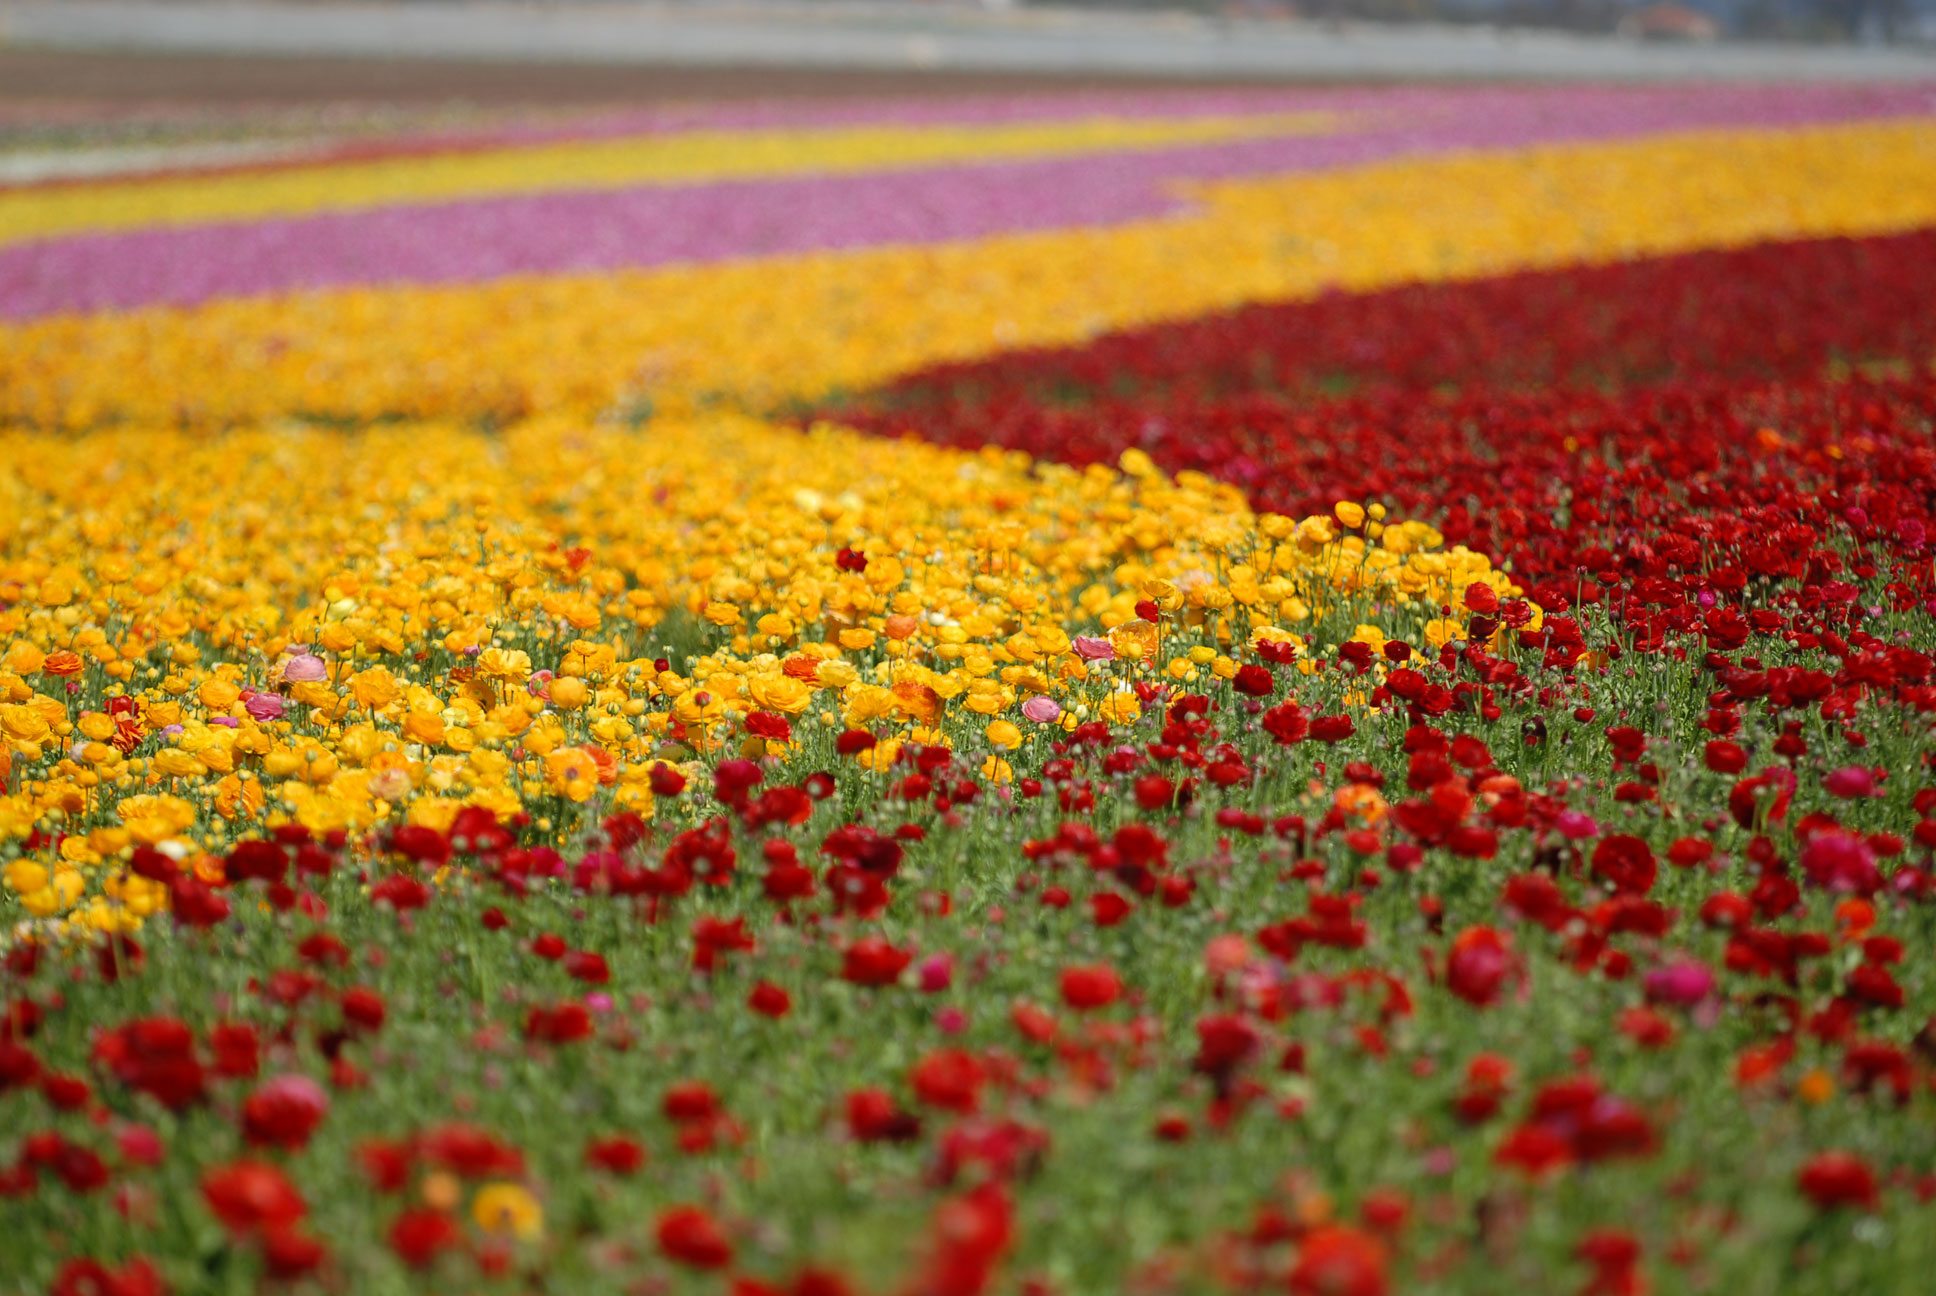 Rows of Red, Pink and Yellow Flowers